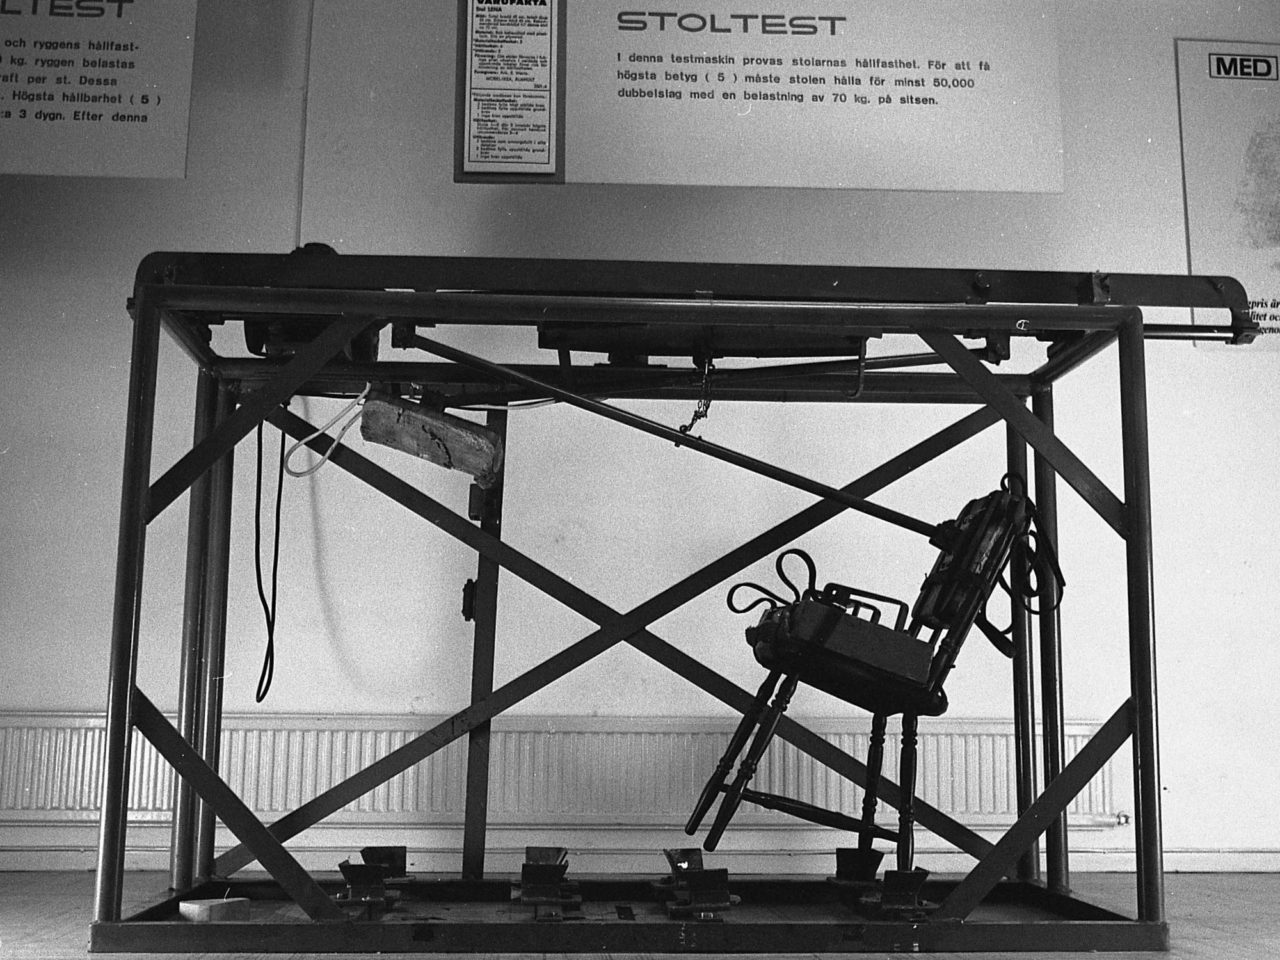 Large testing machine in which a chair is secured. Above is a sign with text 